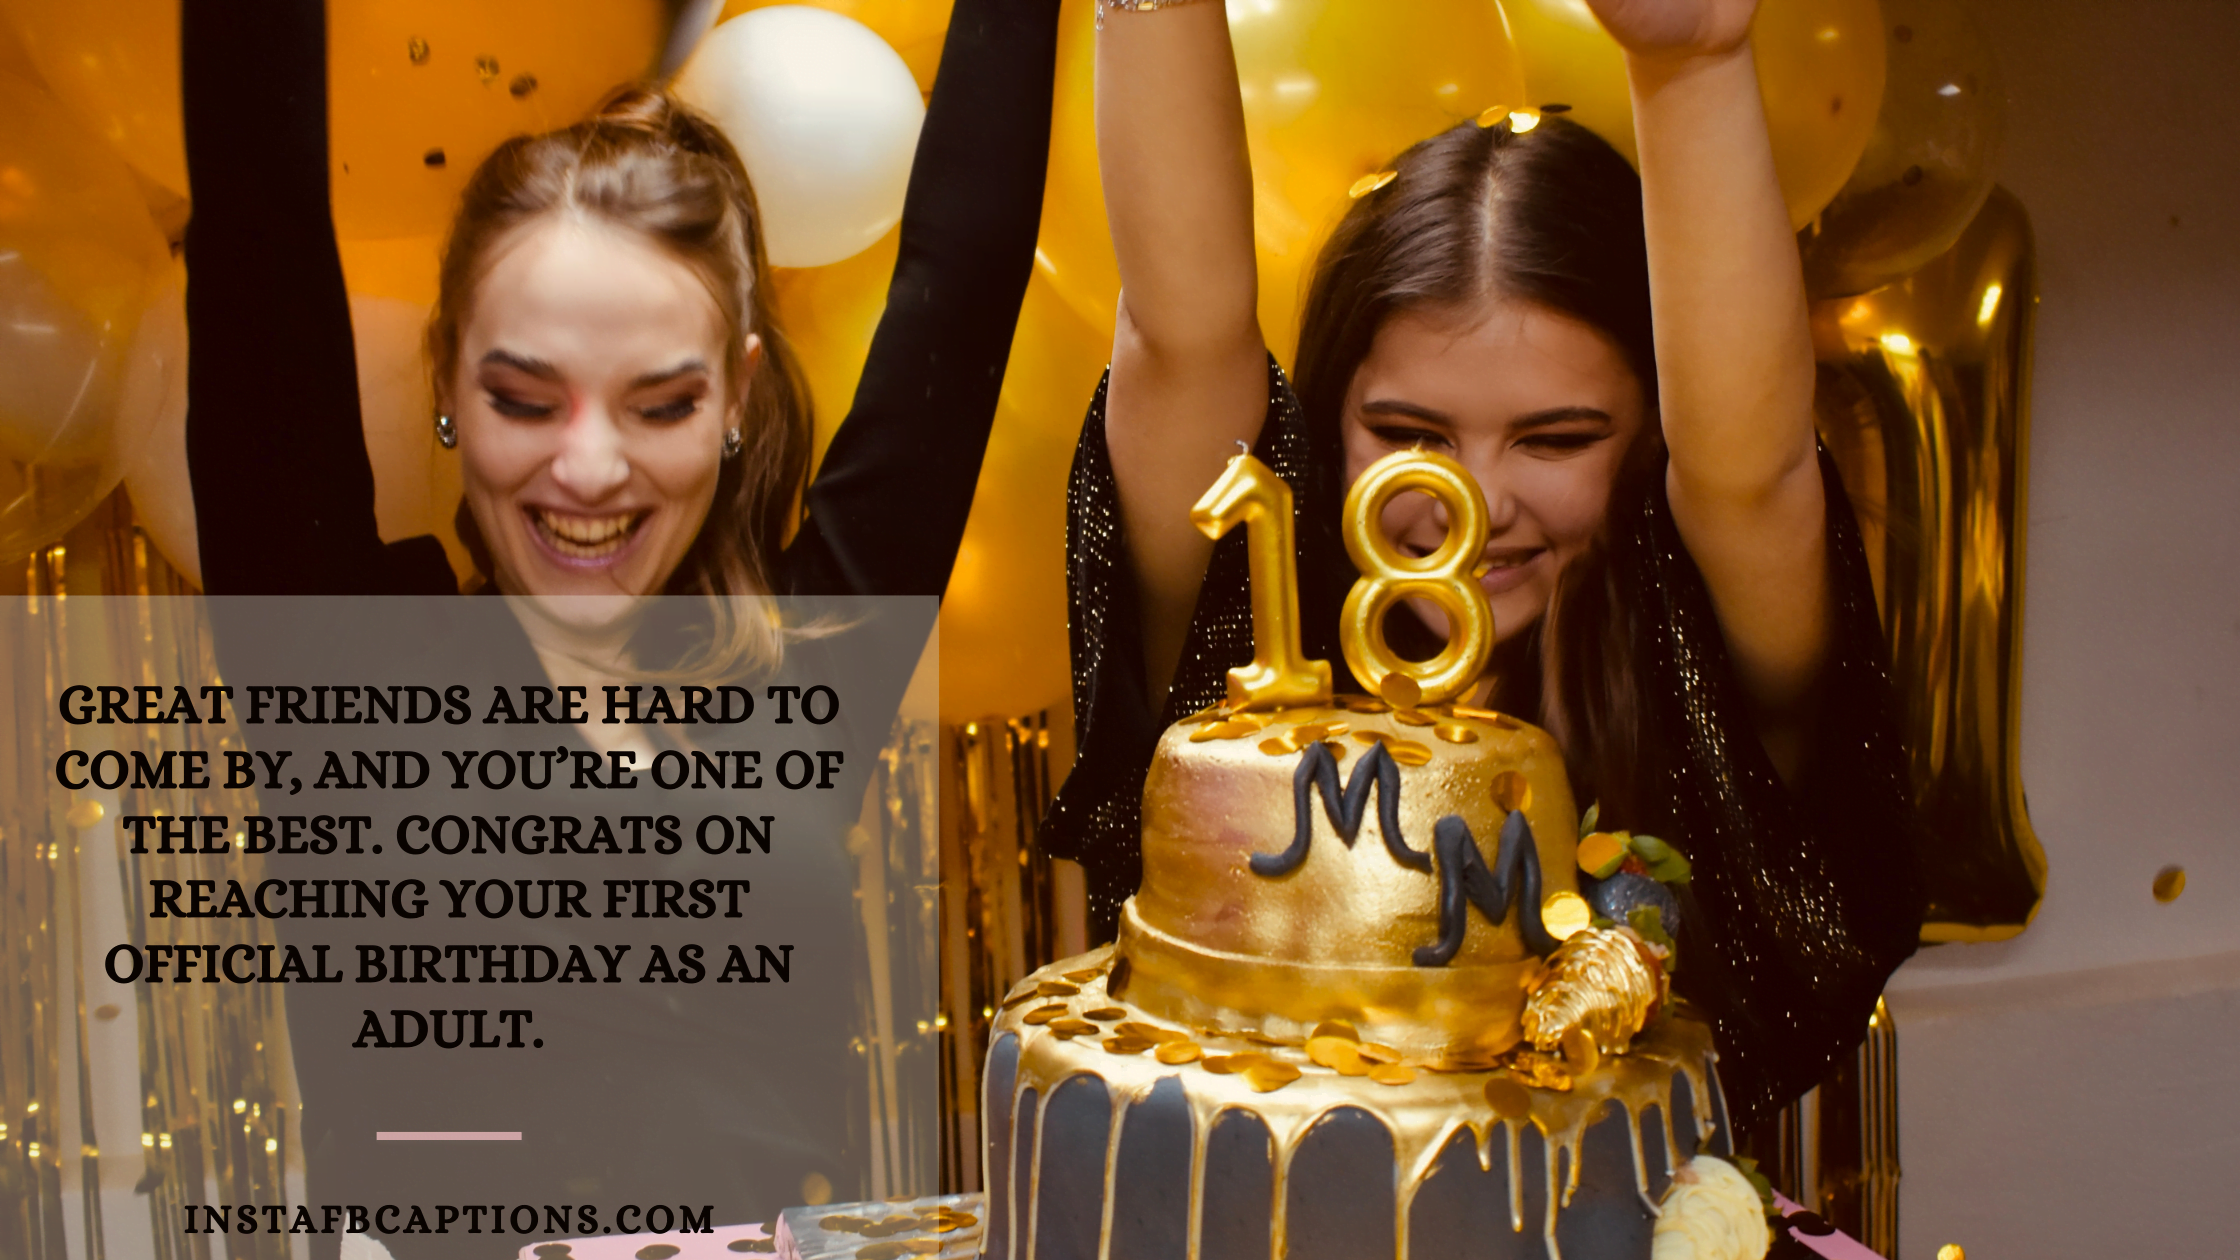 Great friends are hard to come by, and you’re one of the best. Congrats on reaching your first official birthday as an adult.  - 18th birthday wishes for best friend  - [New Captions] Best 18th Birthday Quotes For Instagram 2023